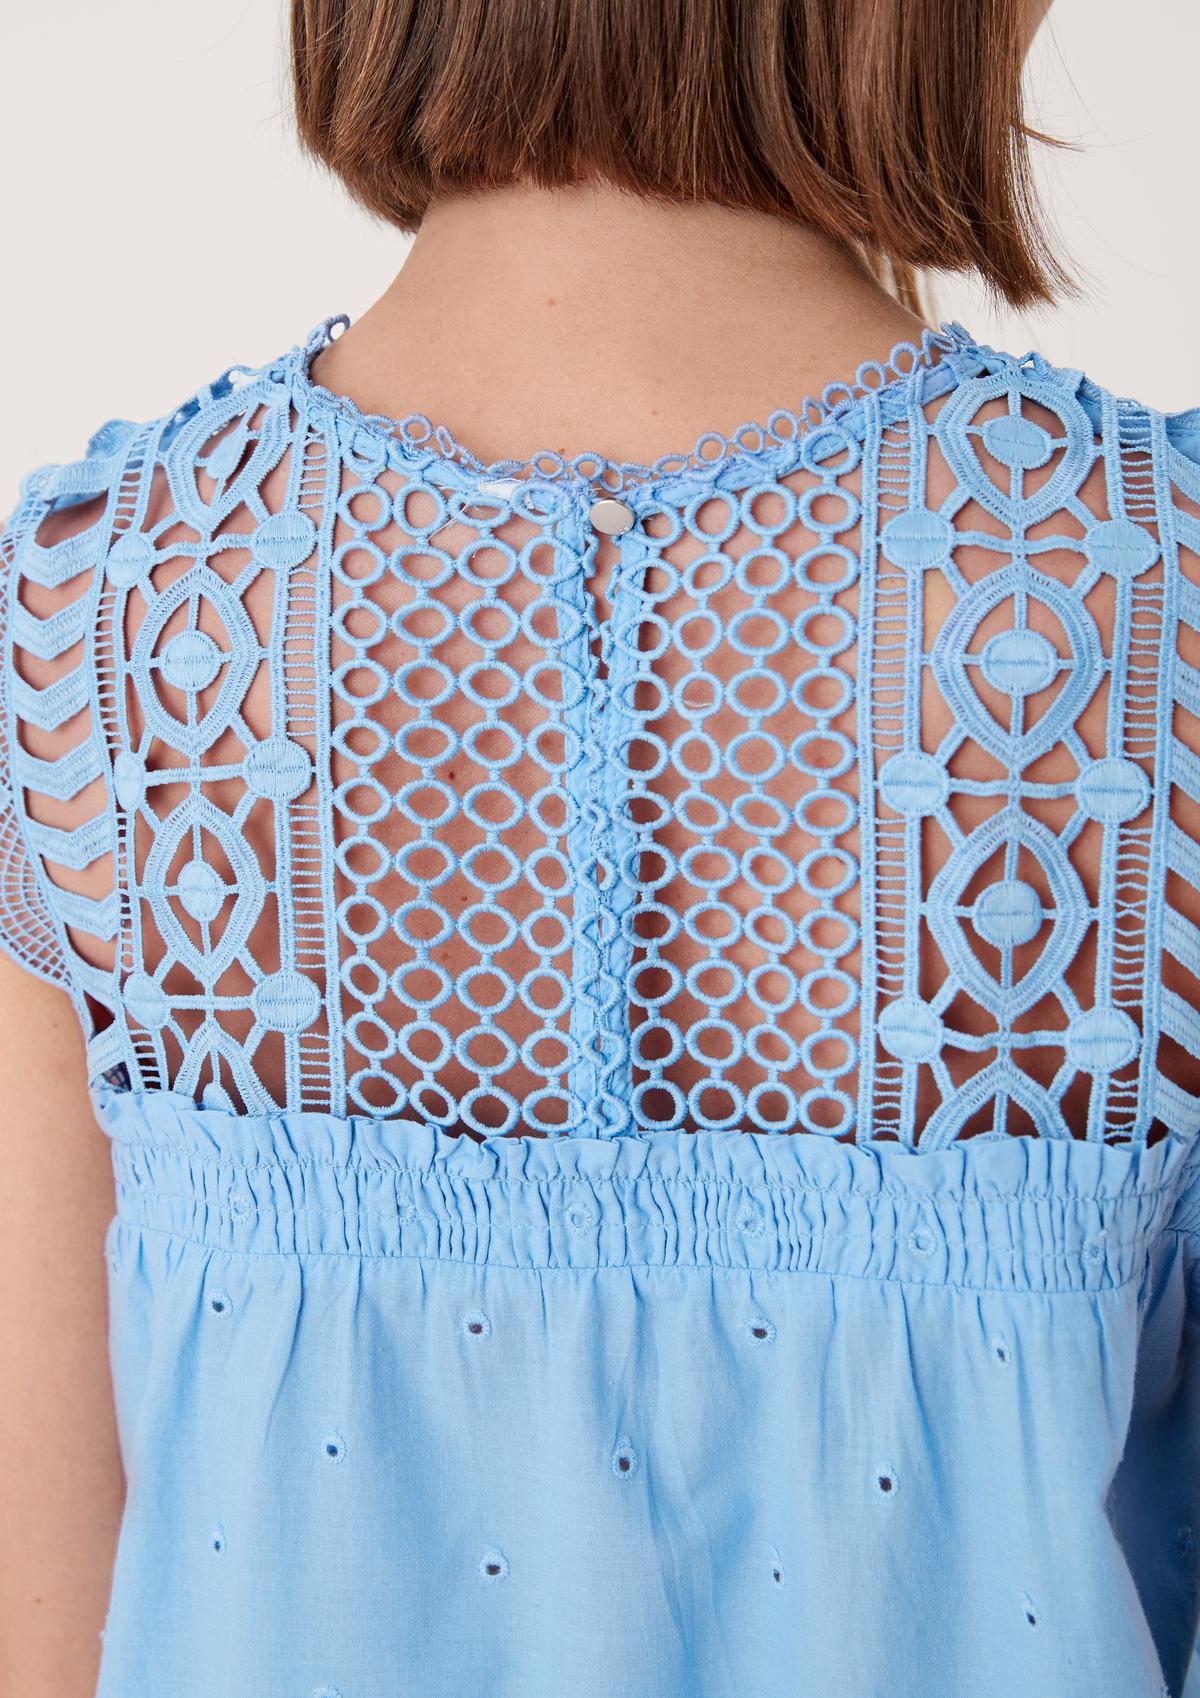 s.Oliver Top van broderie anglaise